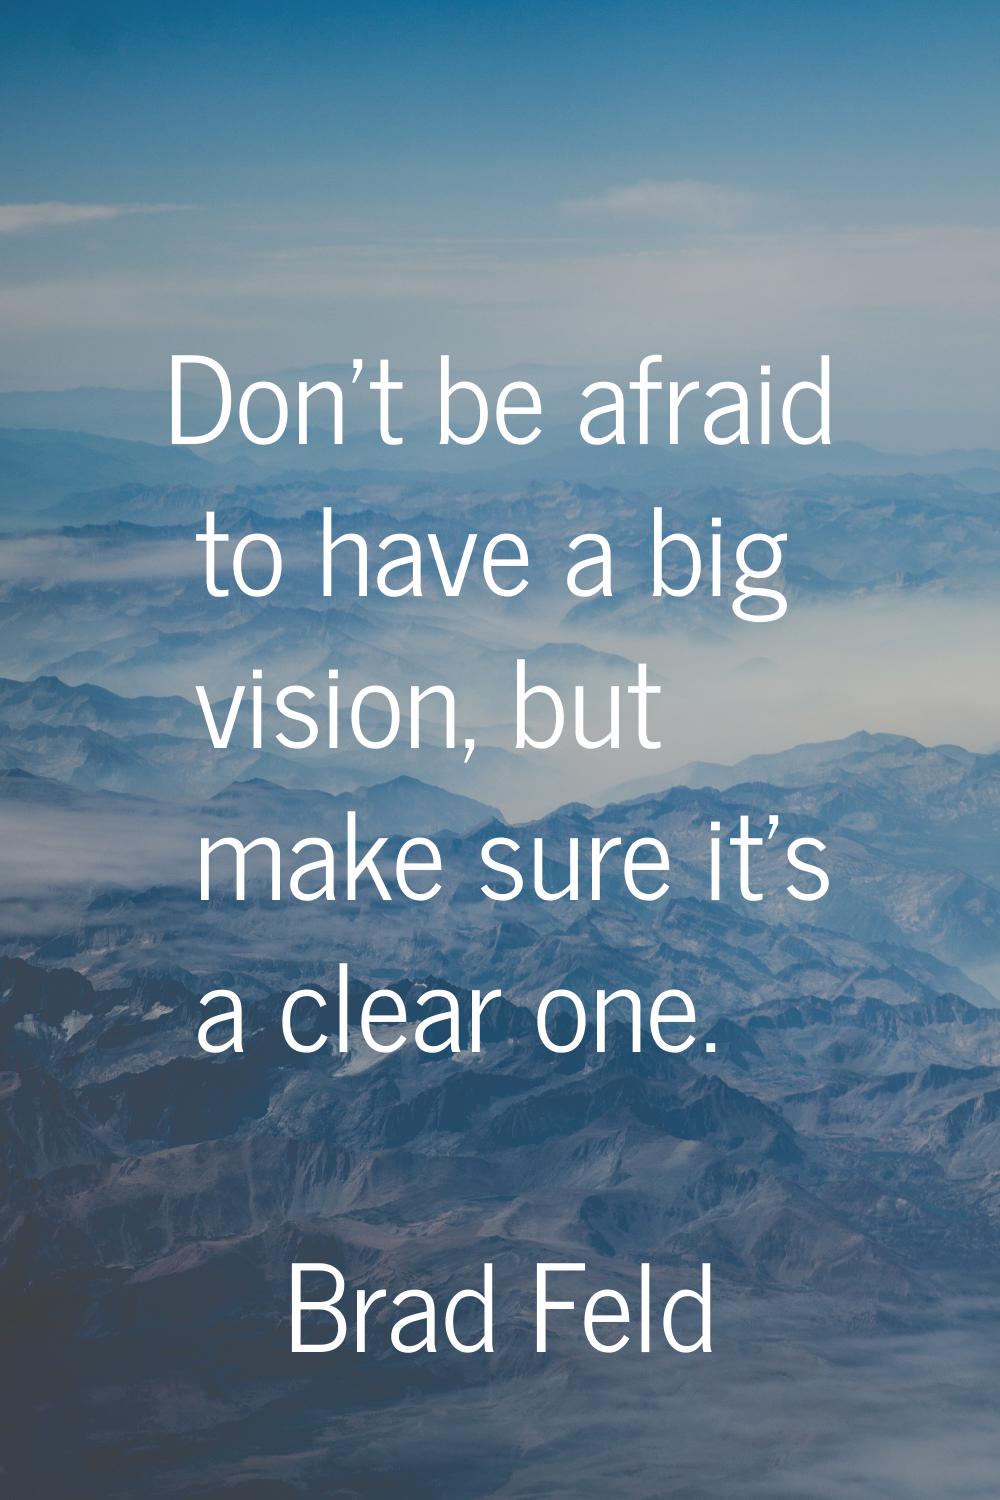 Don't be afraid to have a big vision, but make sure it's a clear one.